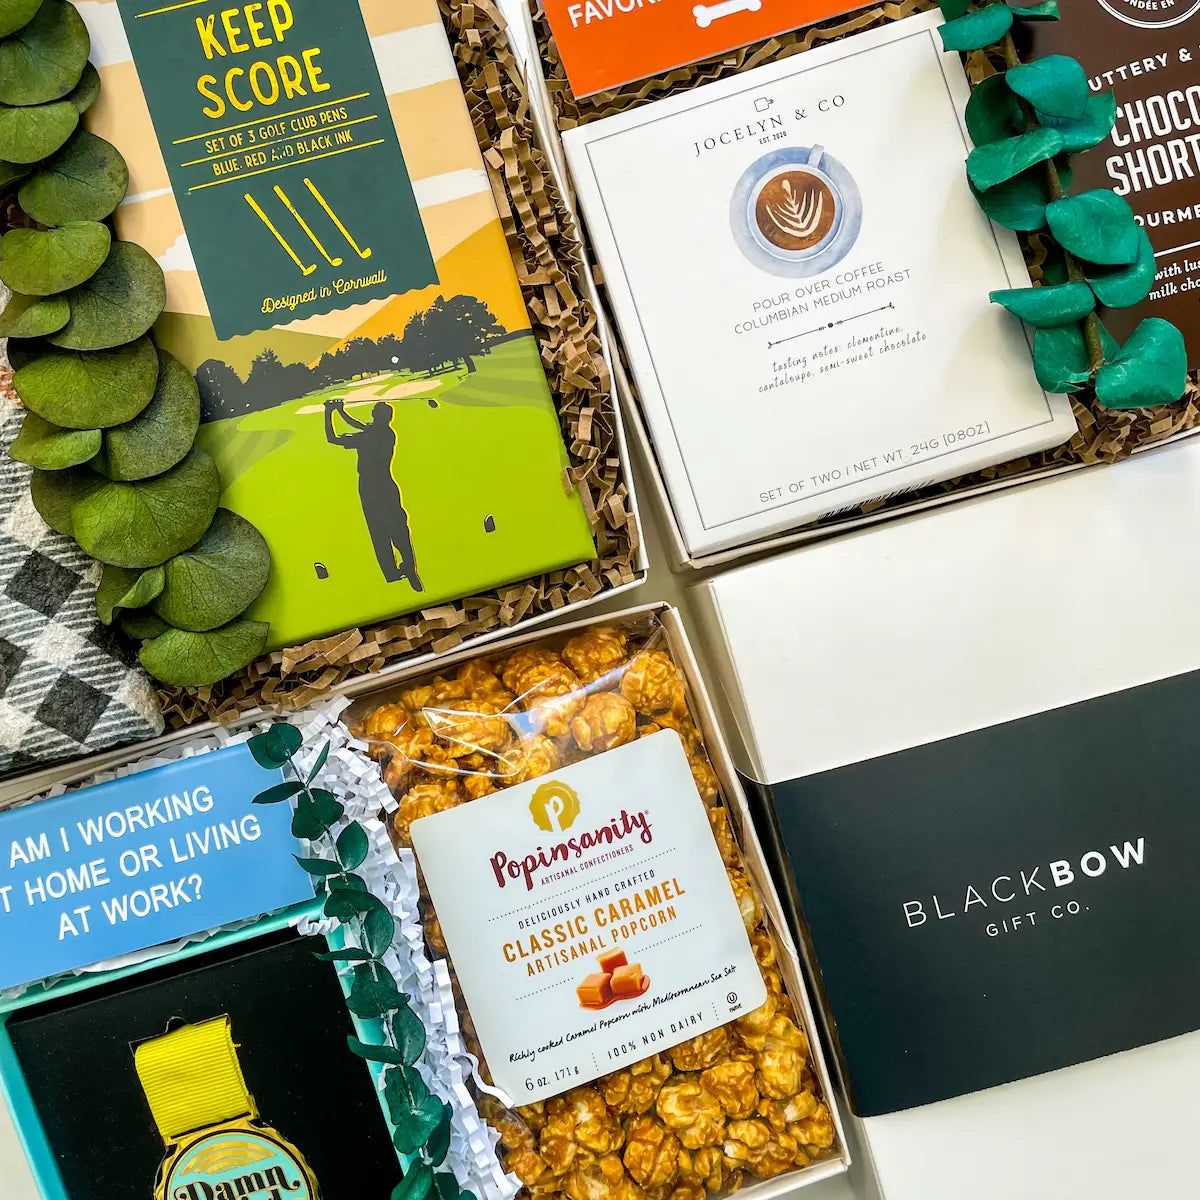 Budget-friendly gift boxes